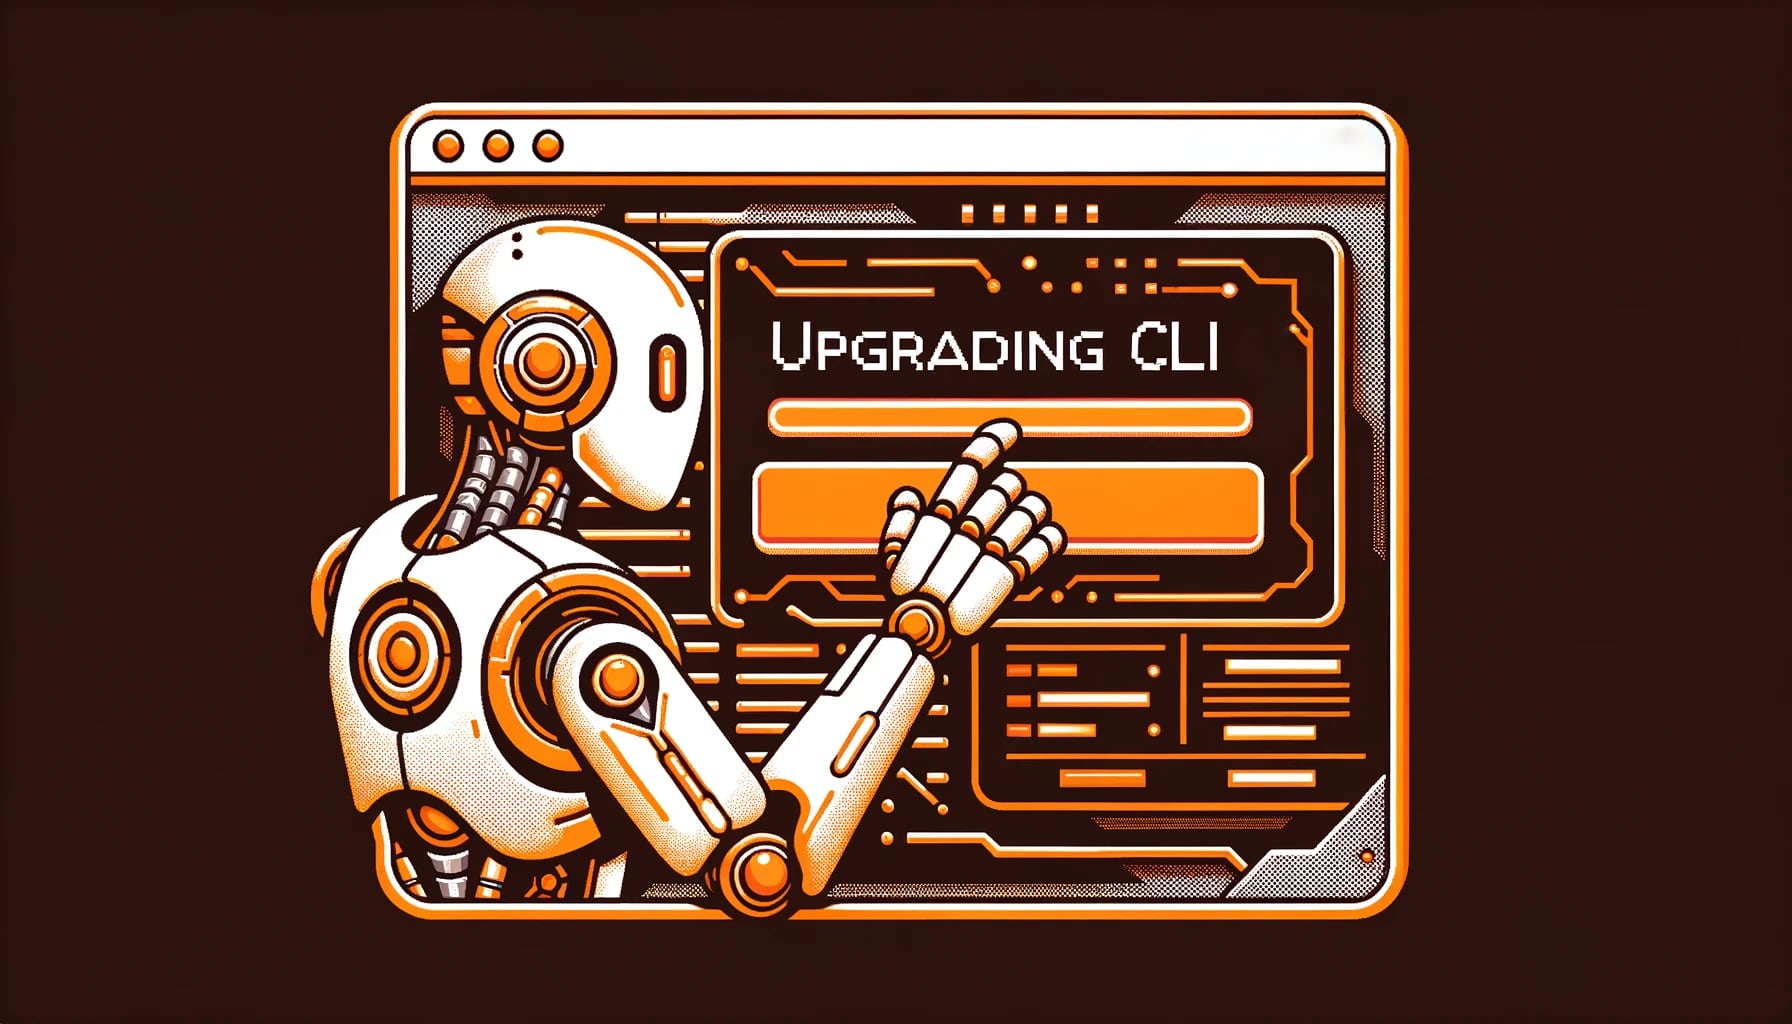 Illustration set in a tech environment with a prominent orange color scheme. An advanced robot, detailed with orange accents, stands focused on a terminal screen. The screen distinctly displays the message 'Upgrading CLI Version' with an accompanying orange progress bar, emphasizing the upgrade process.